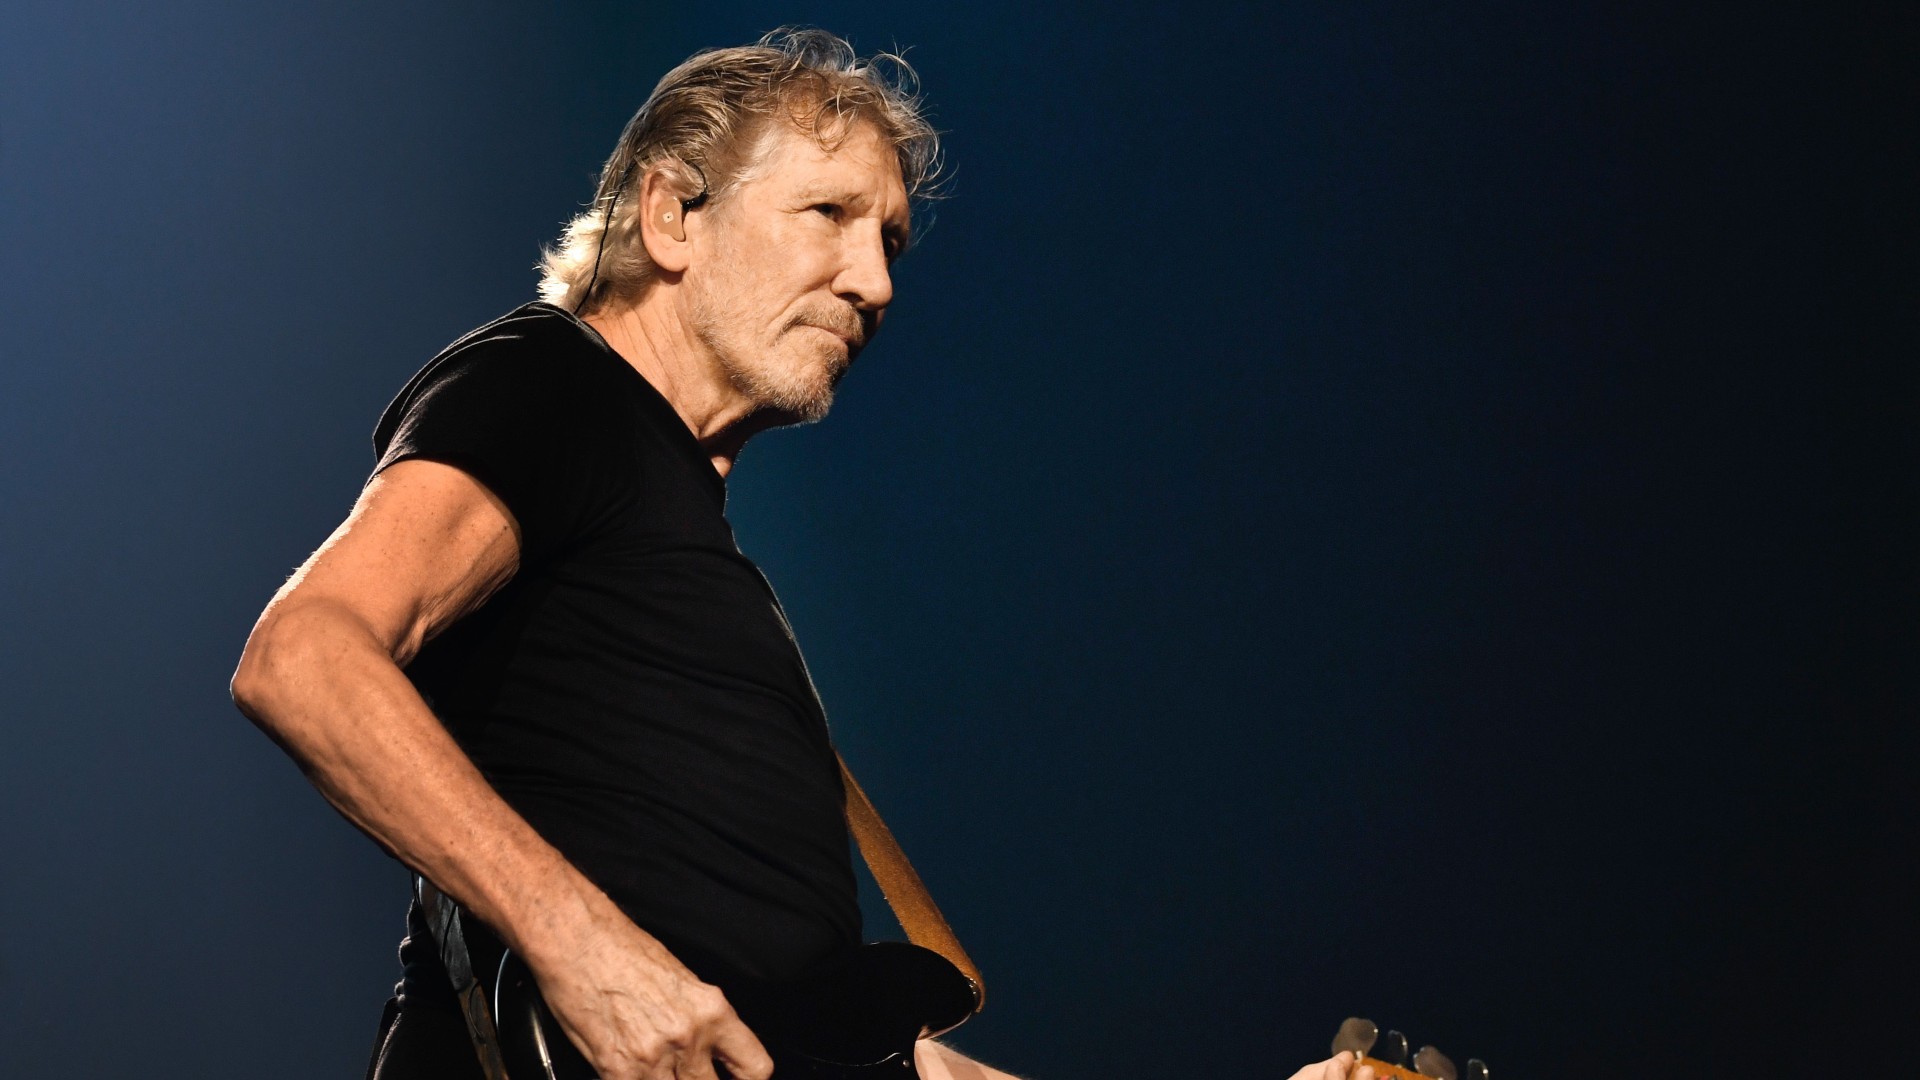 The Jewish community in Chile demands that musician Roger Waters be banned from inciting “hatred and anti-Semitism”